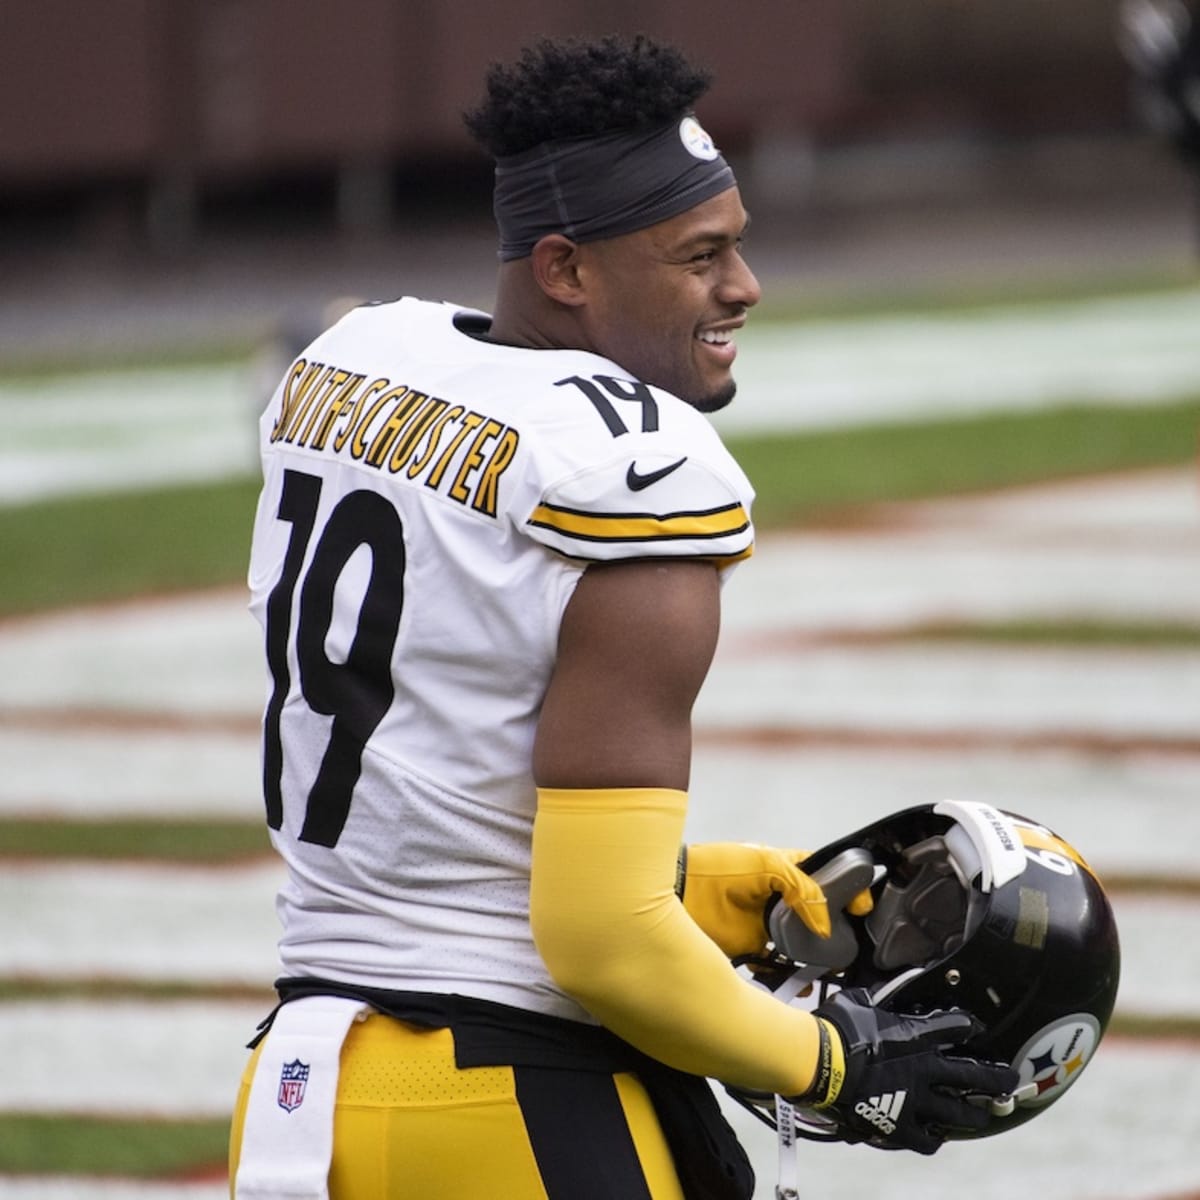 It's pretty clear: Steelers don't want JuJu Smith-Schuster to